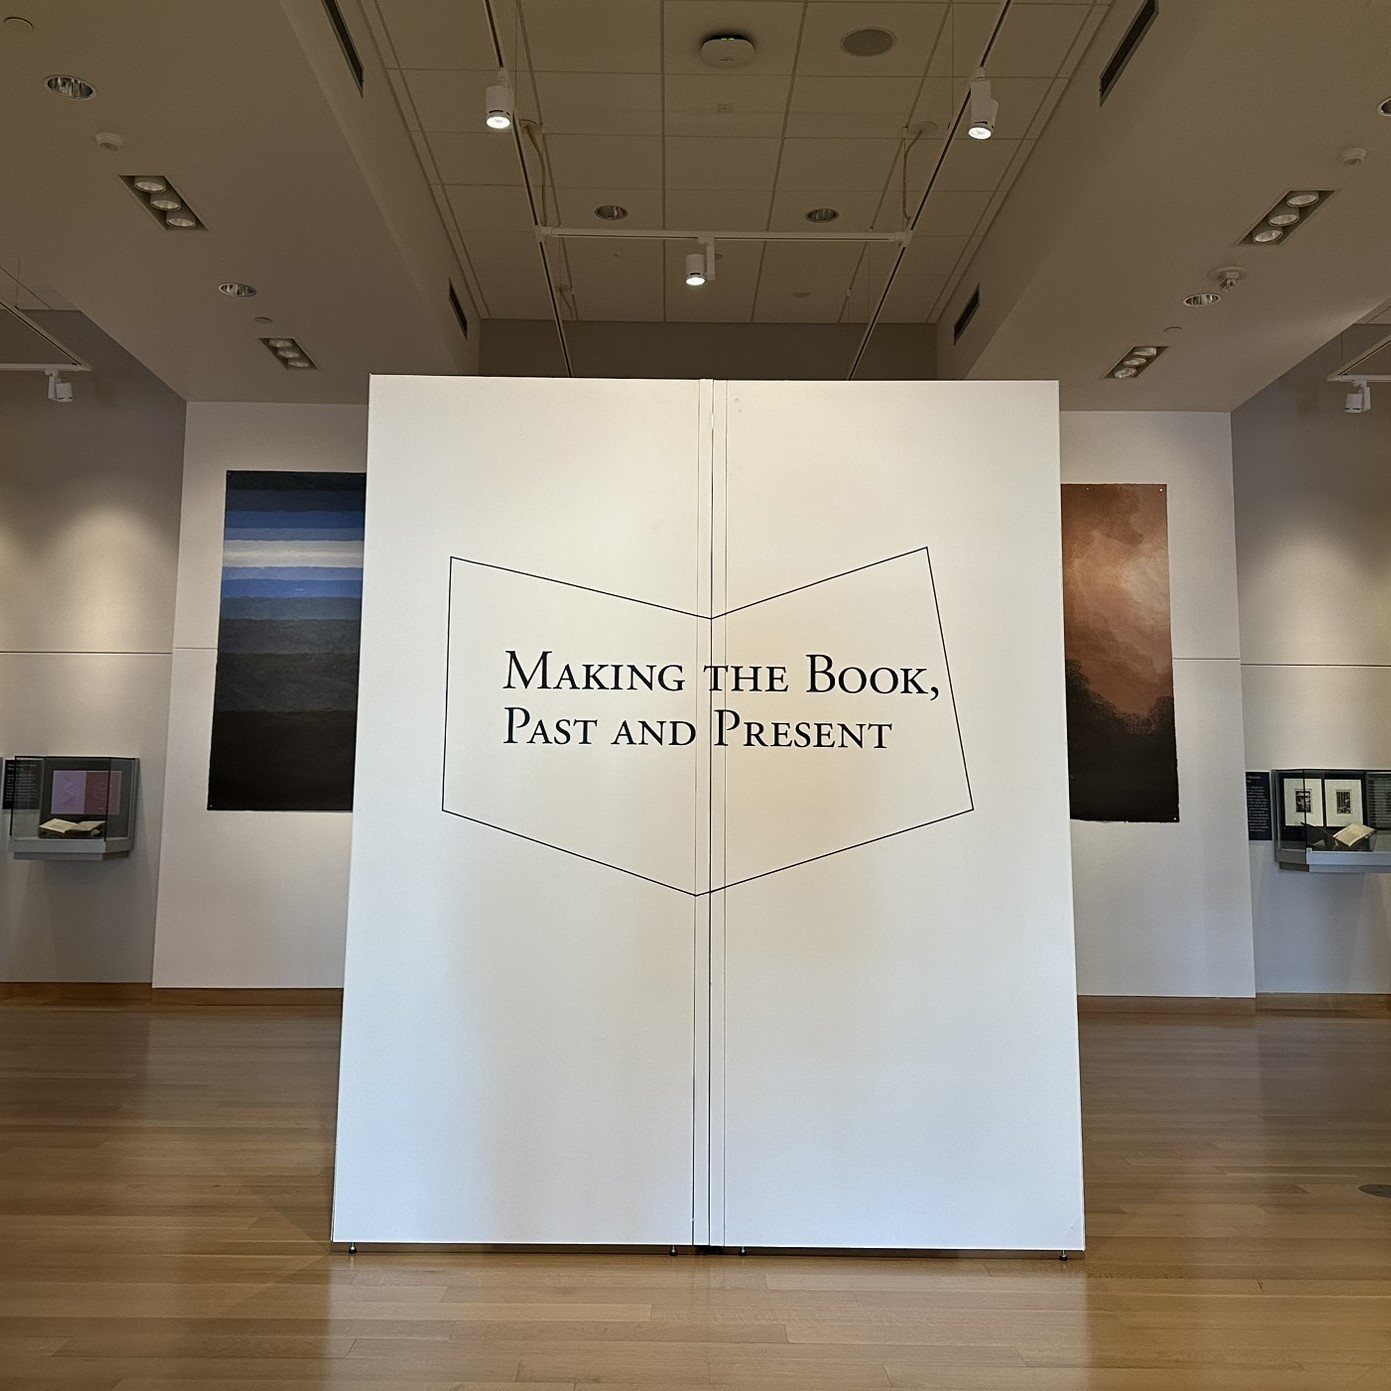 A spacious gallery with two white portable walls in the center, connected. The face of the walls gives the exhibit title of Making the Book, Past and Present in black vinyl.